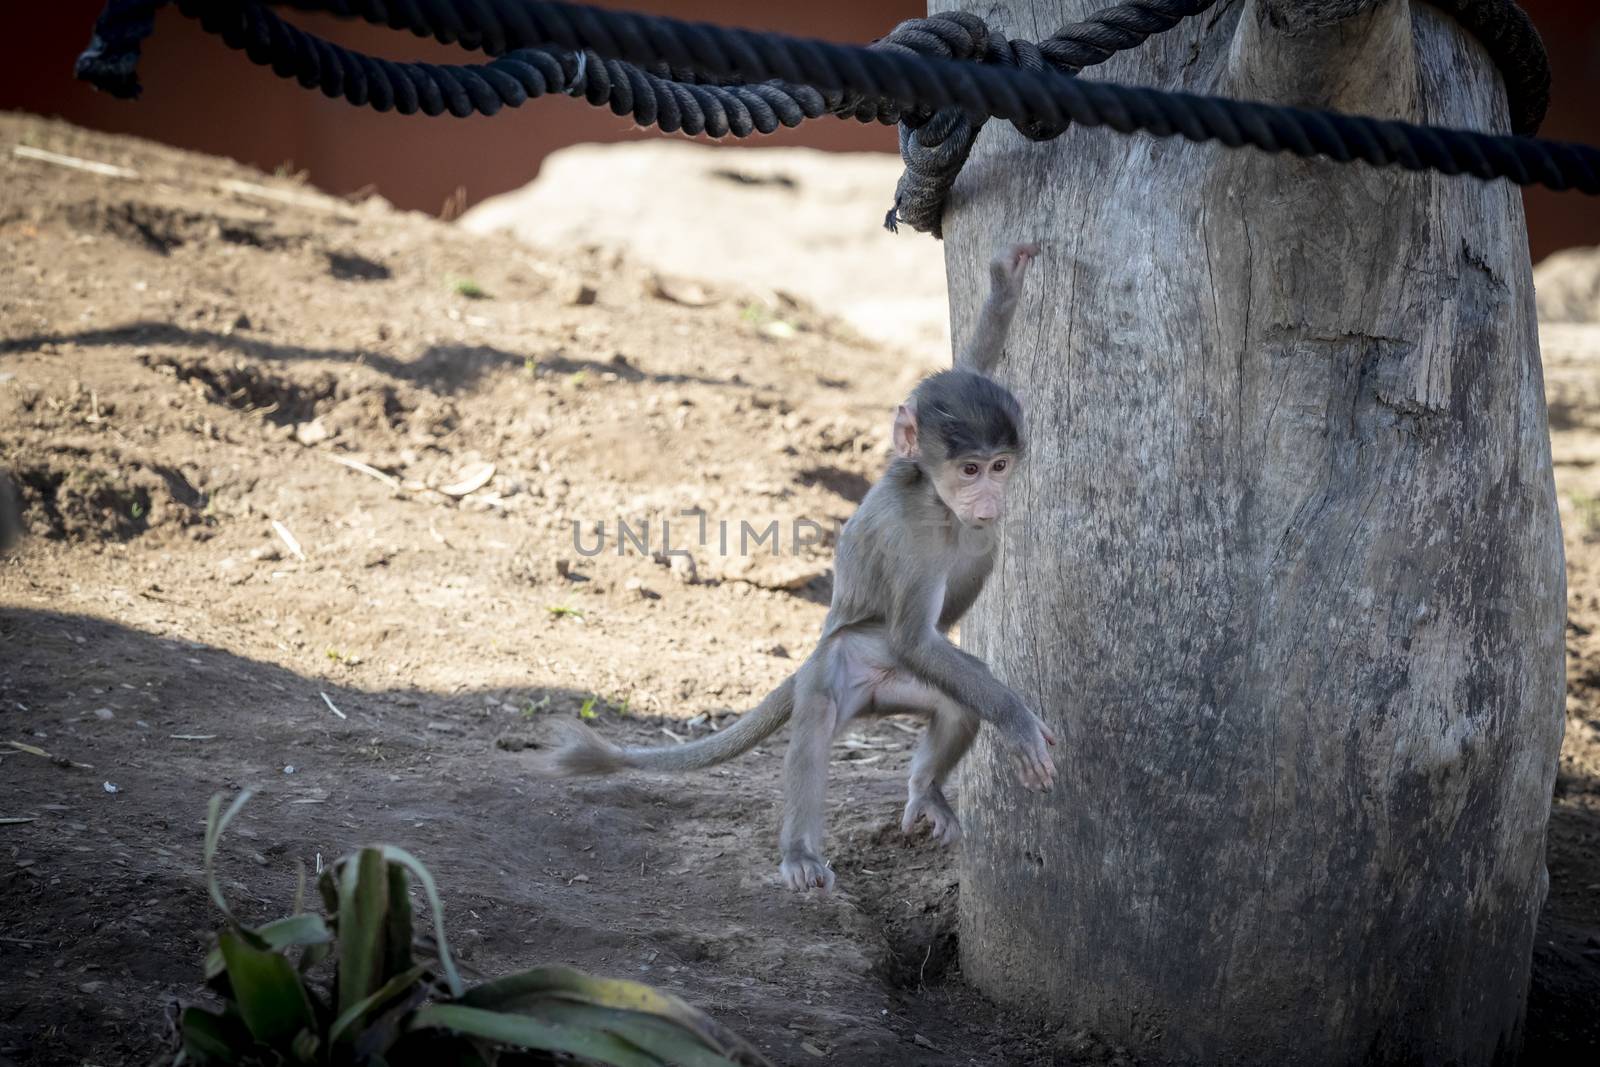 A baby Hamadryas Baboon playing on a wooden structure